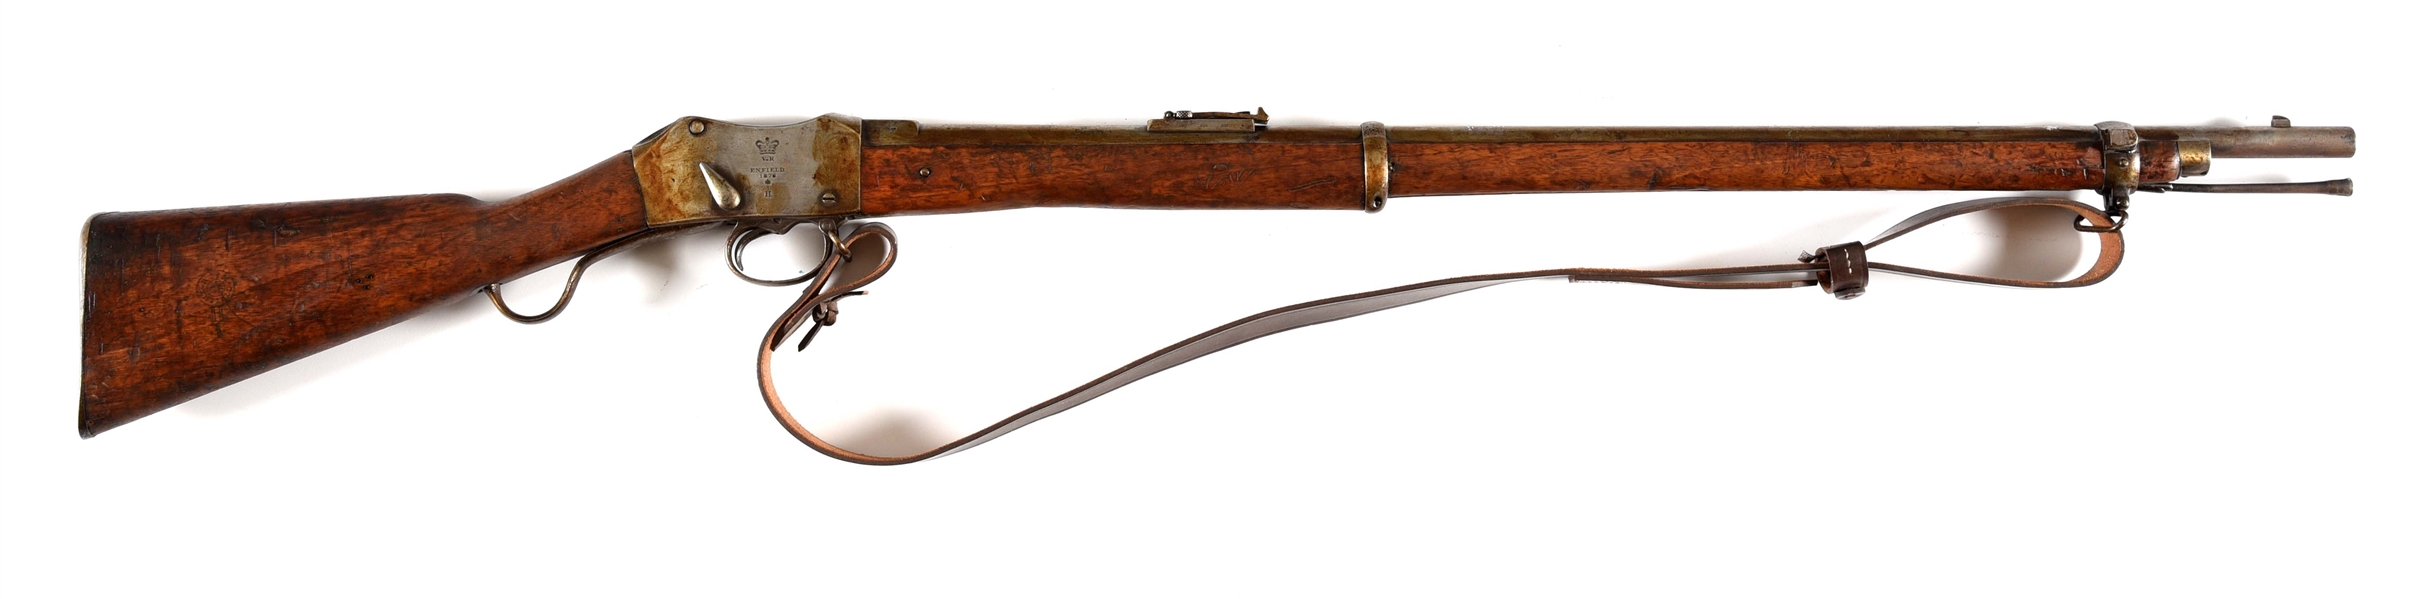 (A) ENFIELD 1876 MARTINI-HENRY ACTION RIFLE.